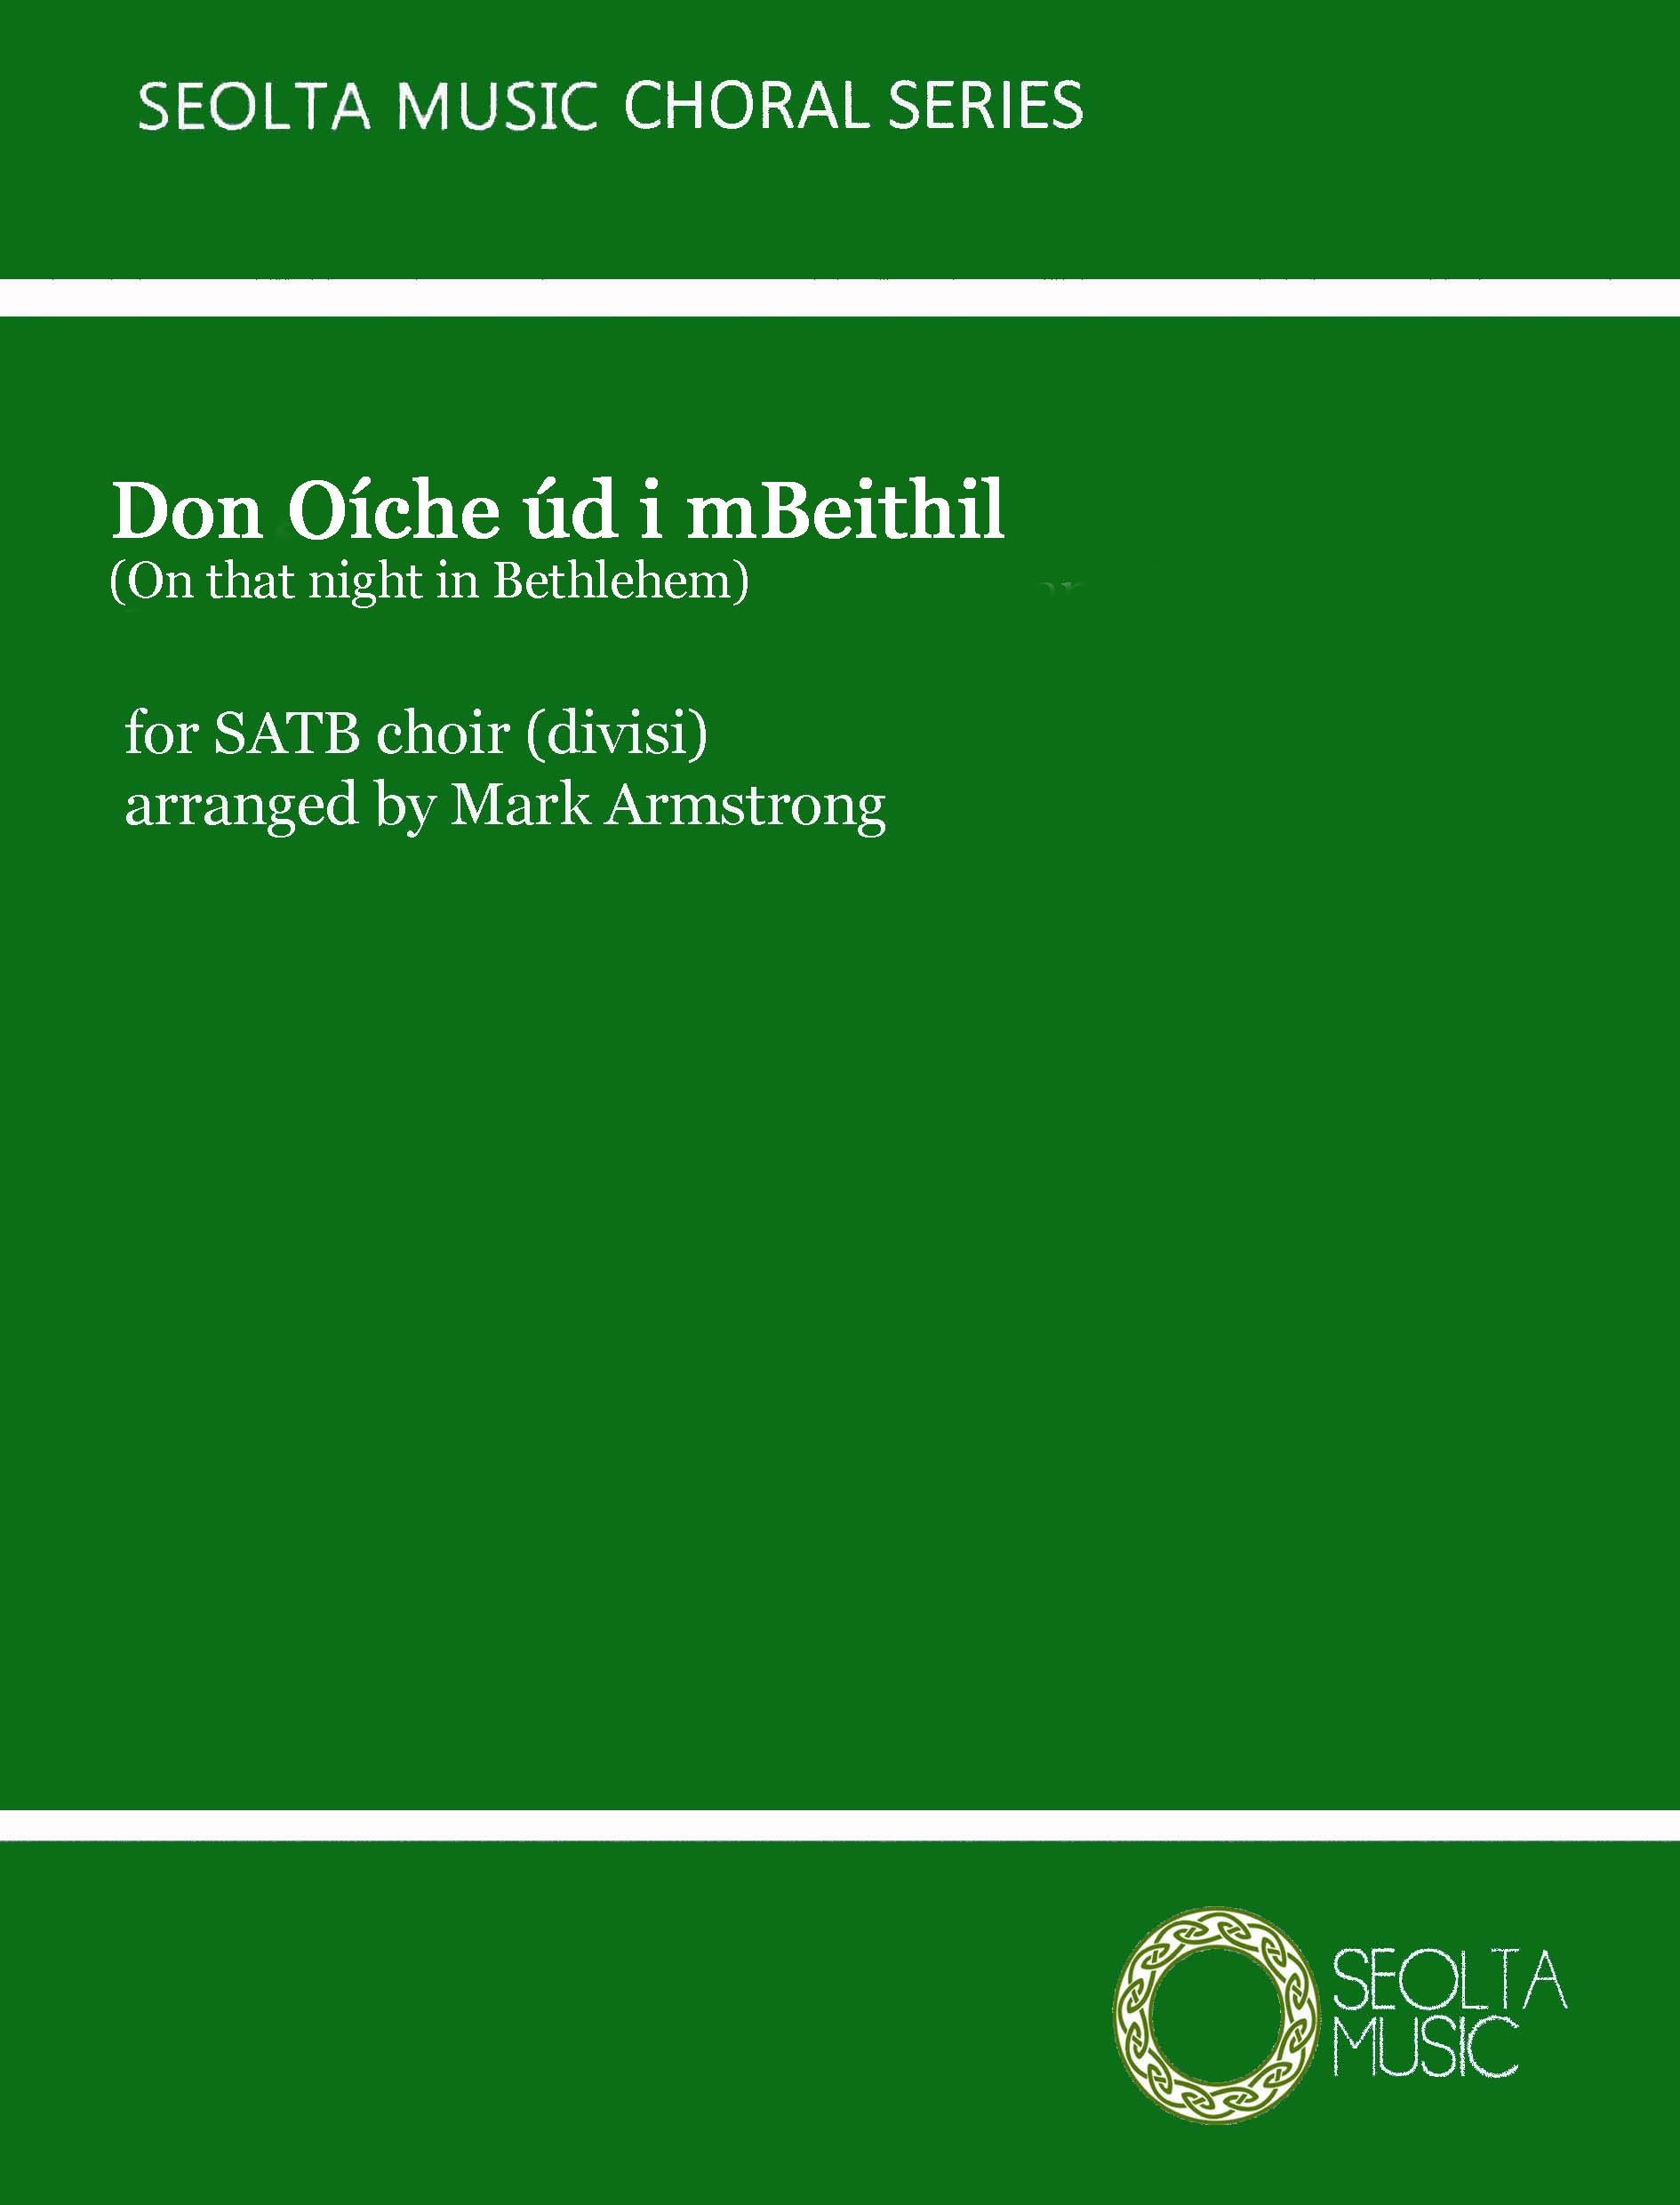 don-oiche-ud-i-mbeithil-irish-choral-sheet-music